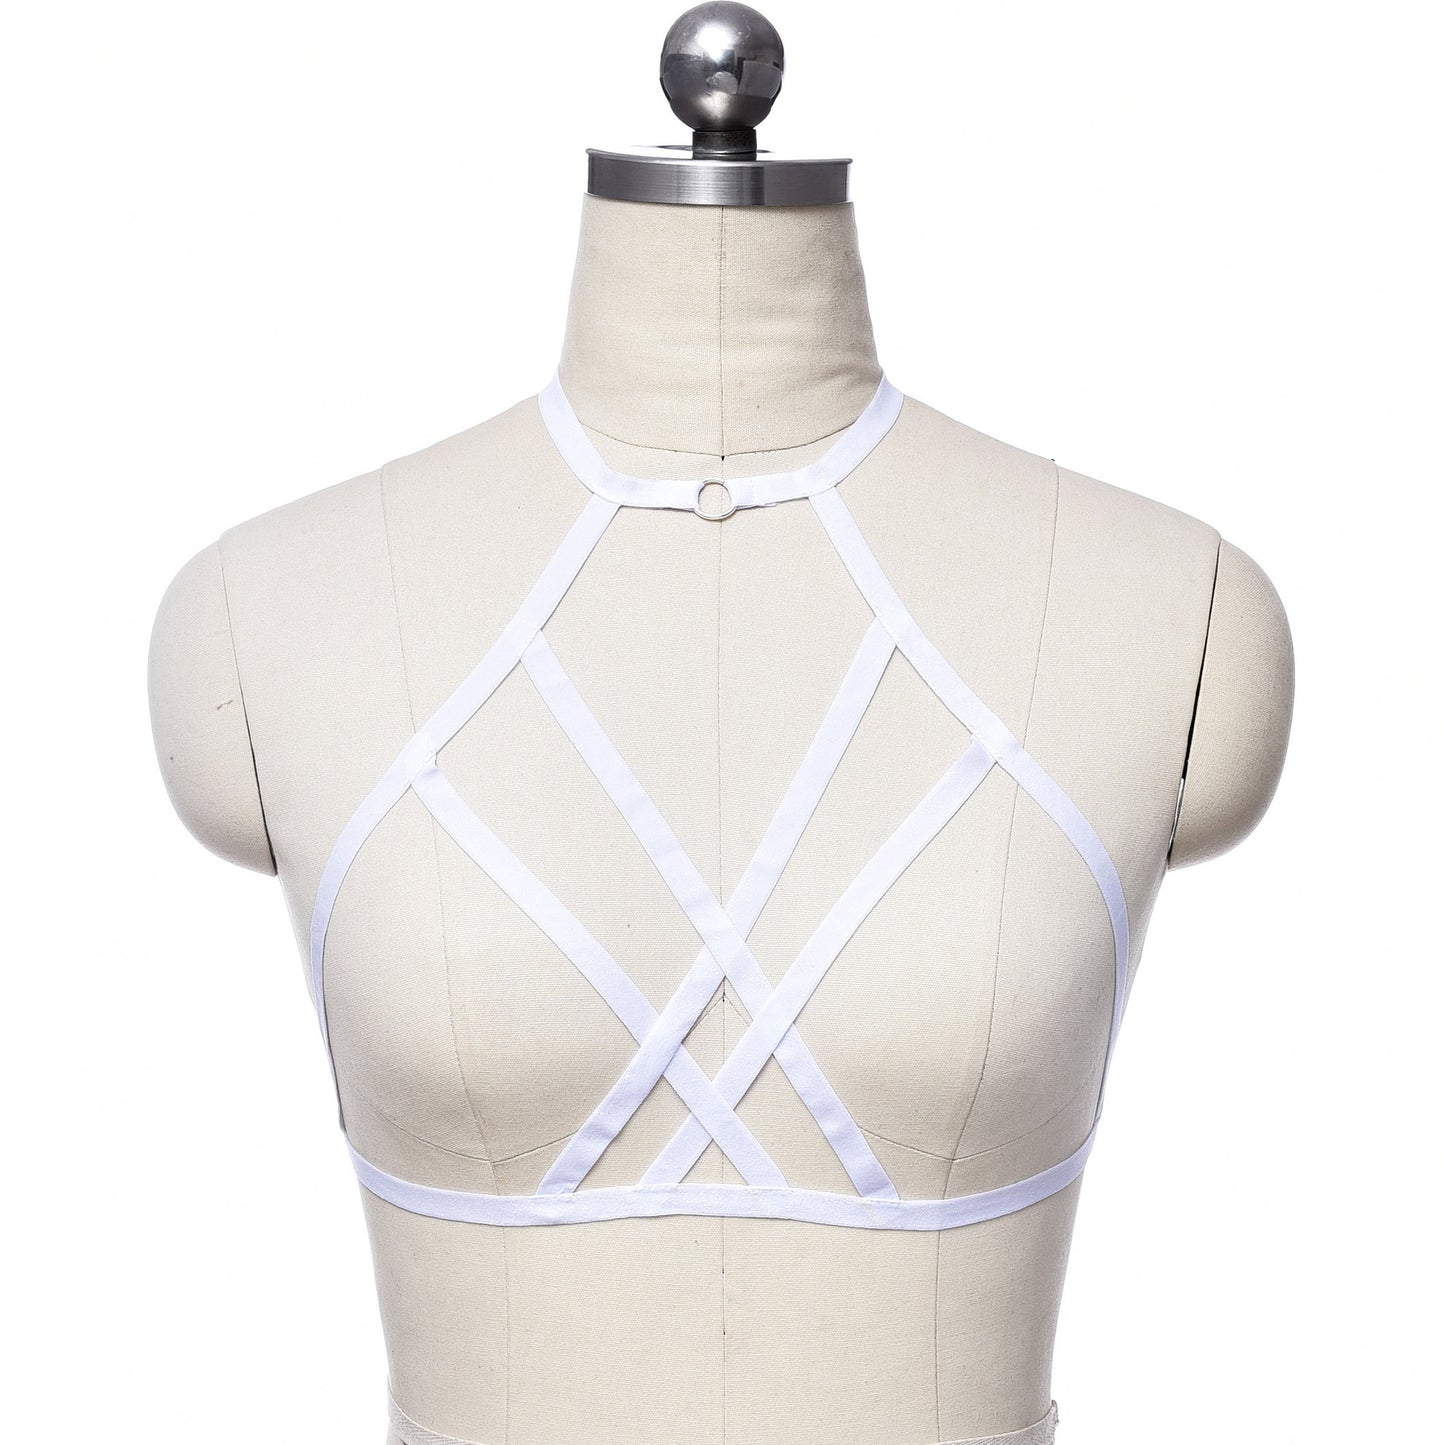 Wife Bra for Sexy Naughty Sexy Harness Lingerie